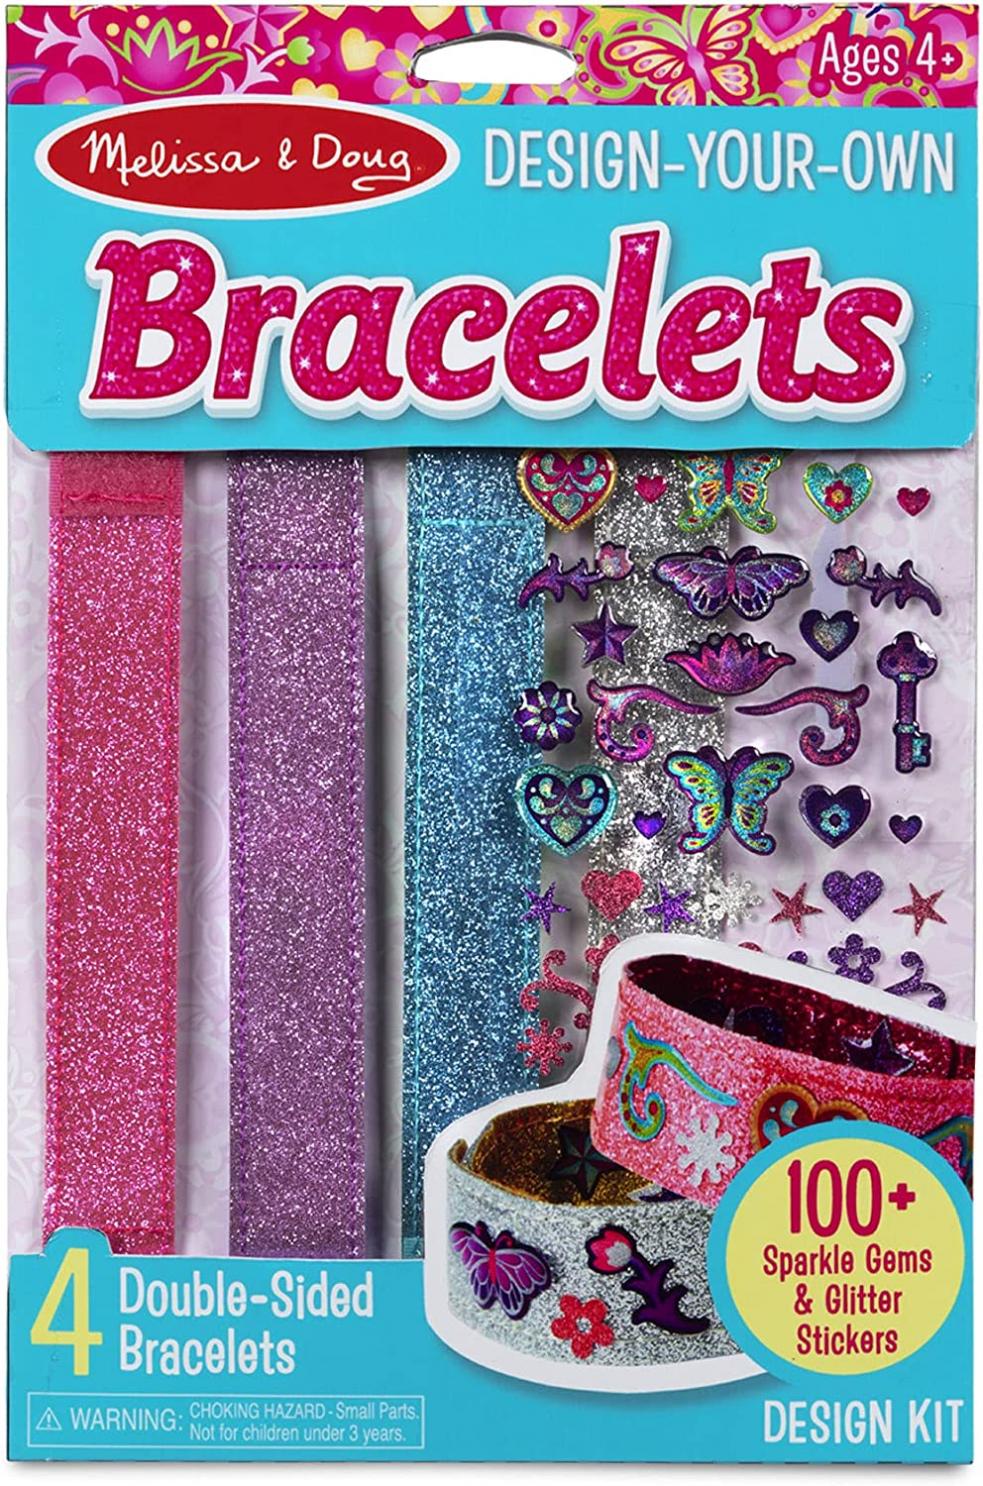 Melissa & Doug Design-Your-Own Bracelets With 100+ Sparkle Gem and Glitter Stickers - Kids Snap Bracelets, Kids Stickers, Jewelry Crafts For Kids Ages 4+